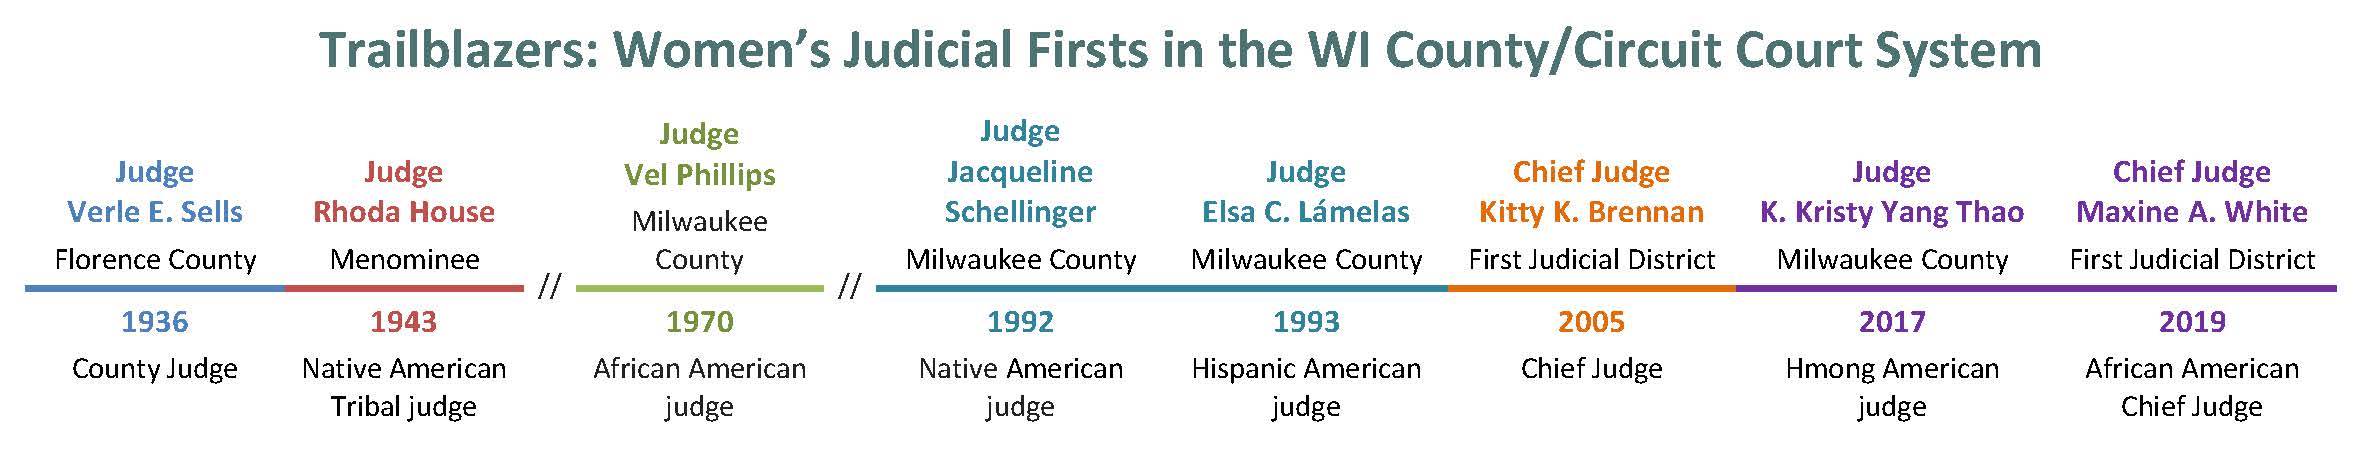 circuit court firsts timeline title larger type.jpg